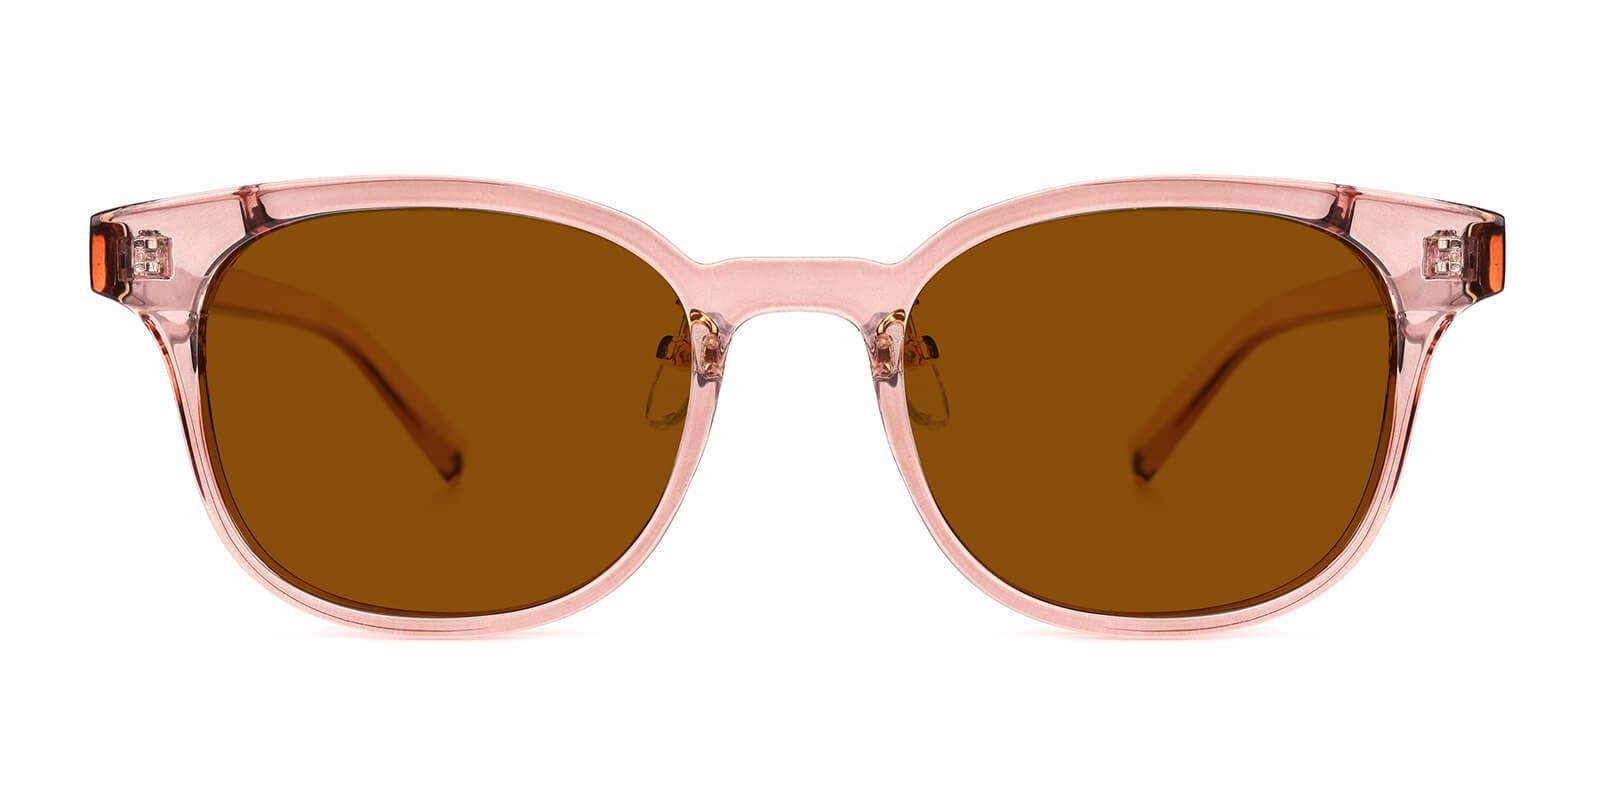 Roaring Pink TR Sunglasses , NosePads Frames from ABBE Glasses